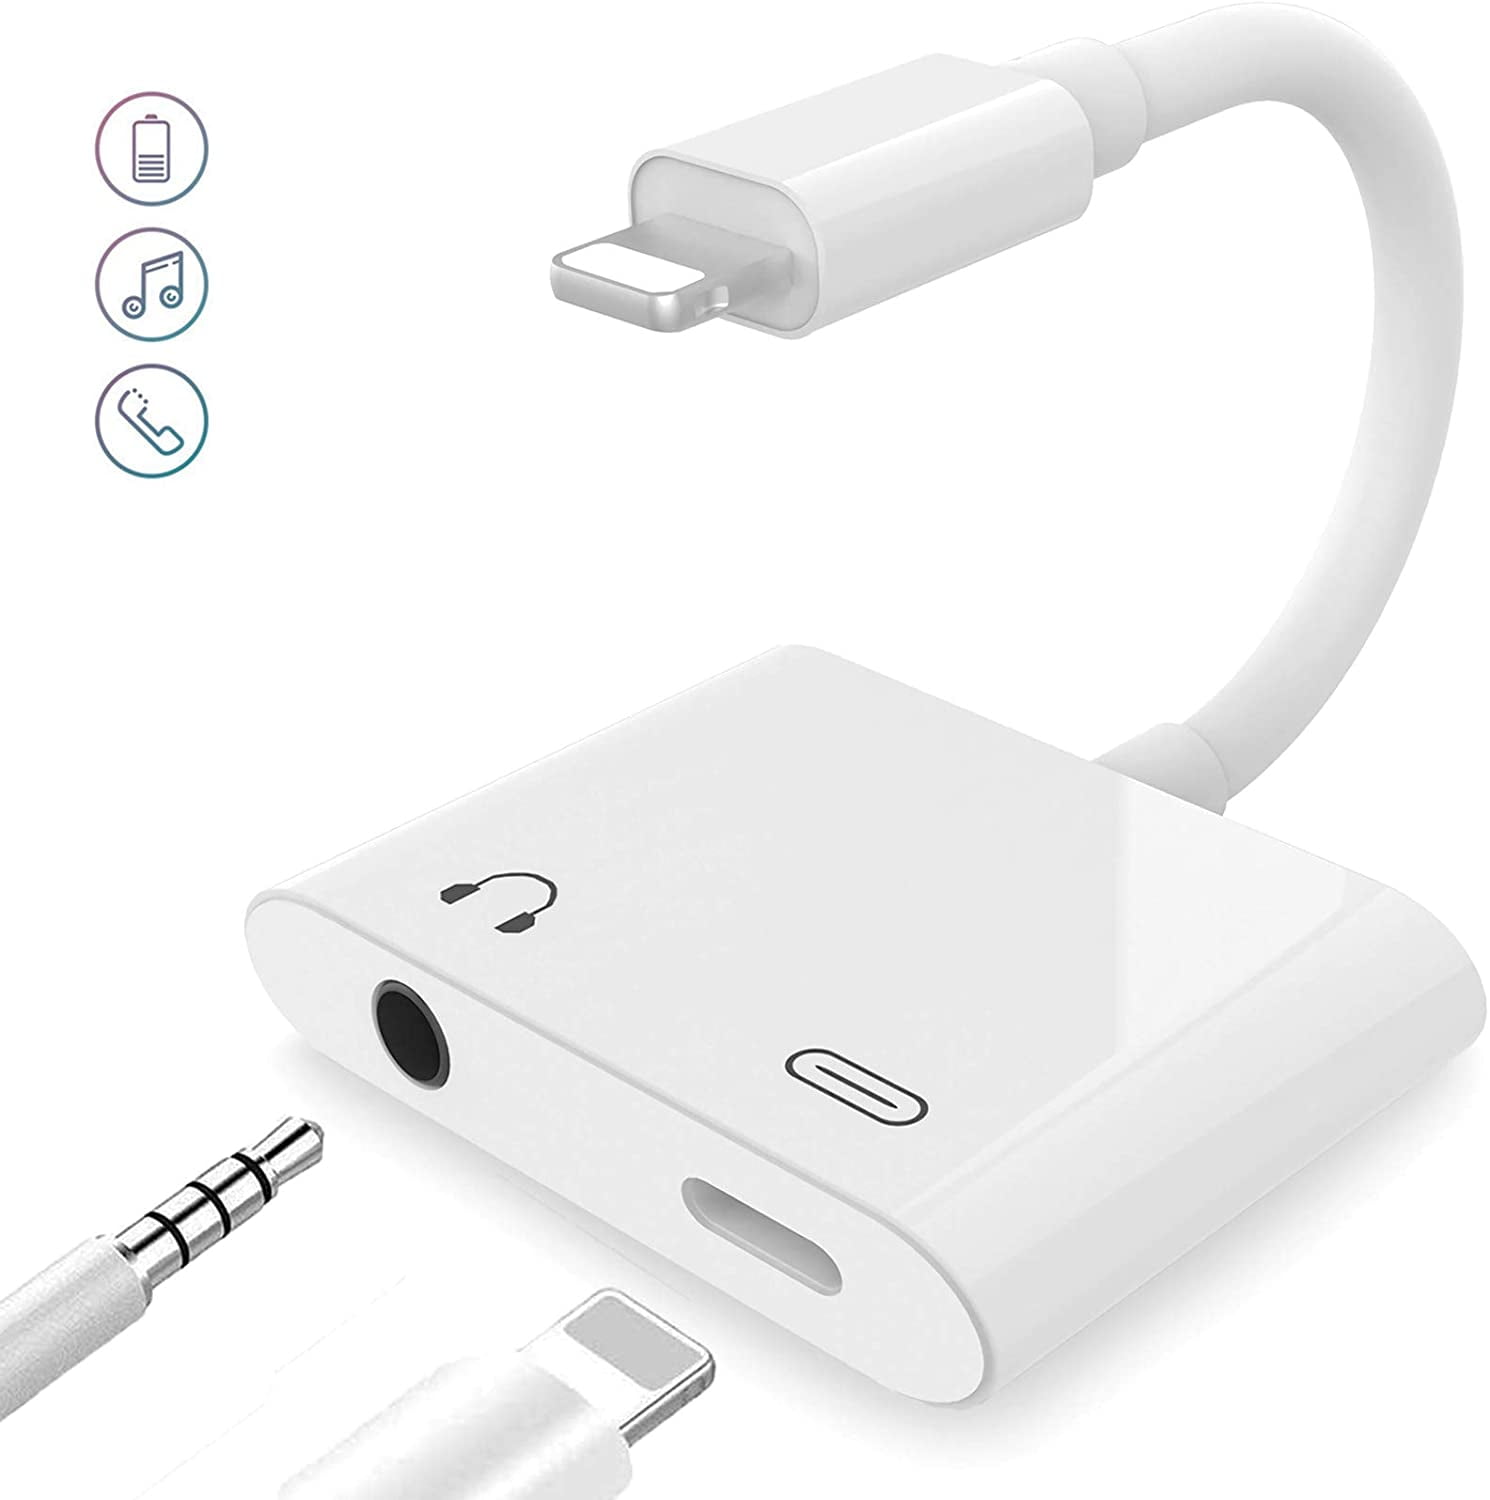 Headphones Adapter for iPhone 8 Dongle Jack Splitter Charger Aux Cable Support Charging & Listen Music Compatible with iPhone 7/7P/8/8P/X/XR/Xs 2 in 1 Headset Adaptor for All IOS Systems Silver Black